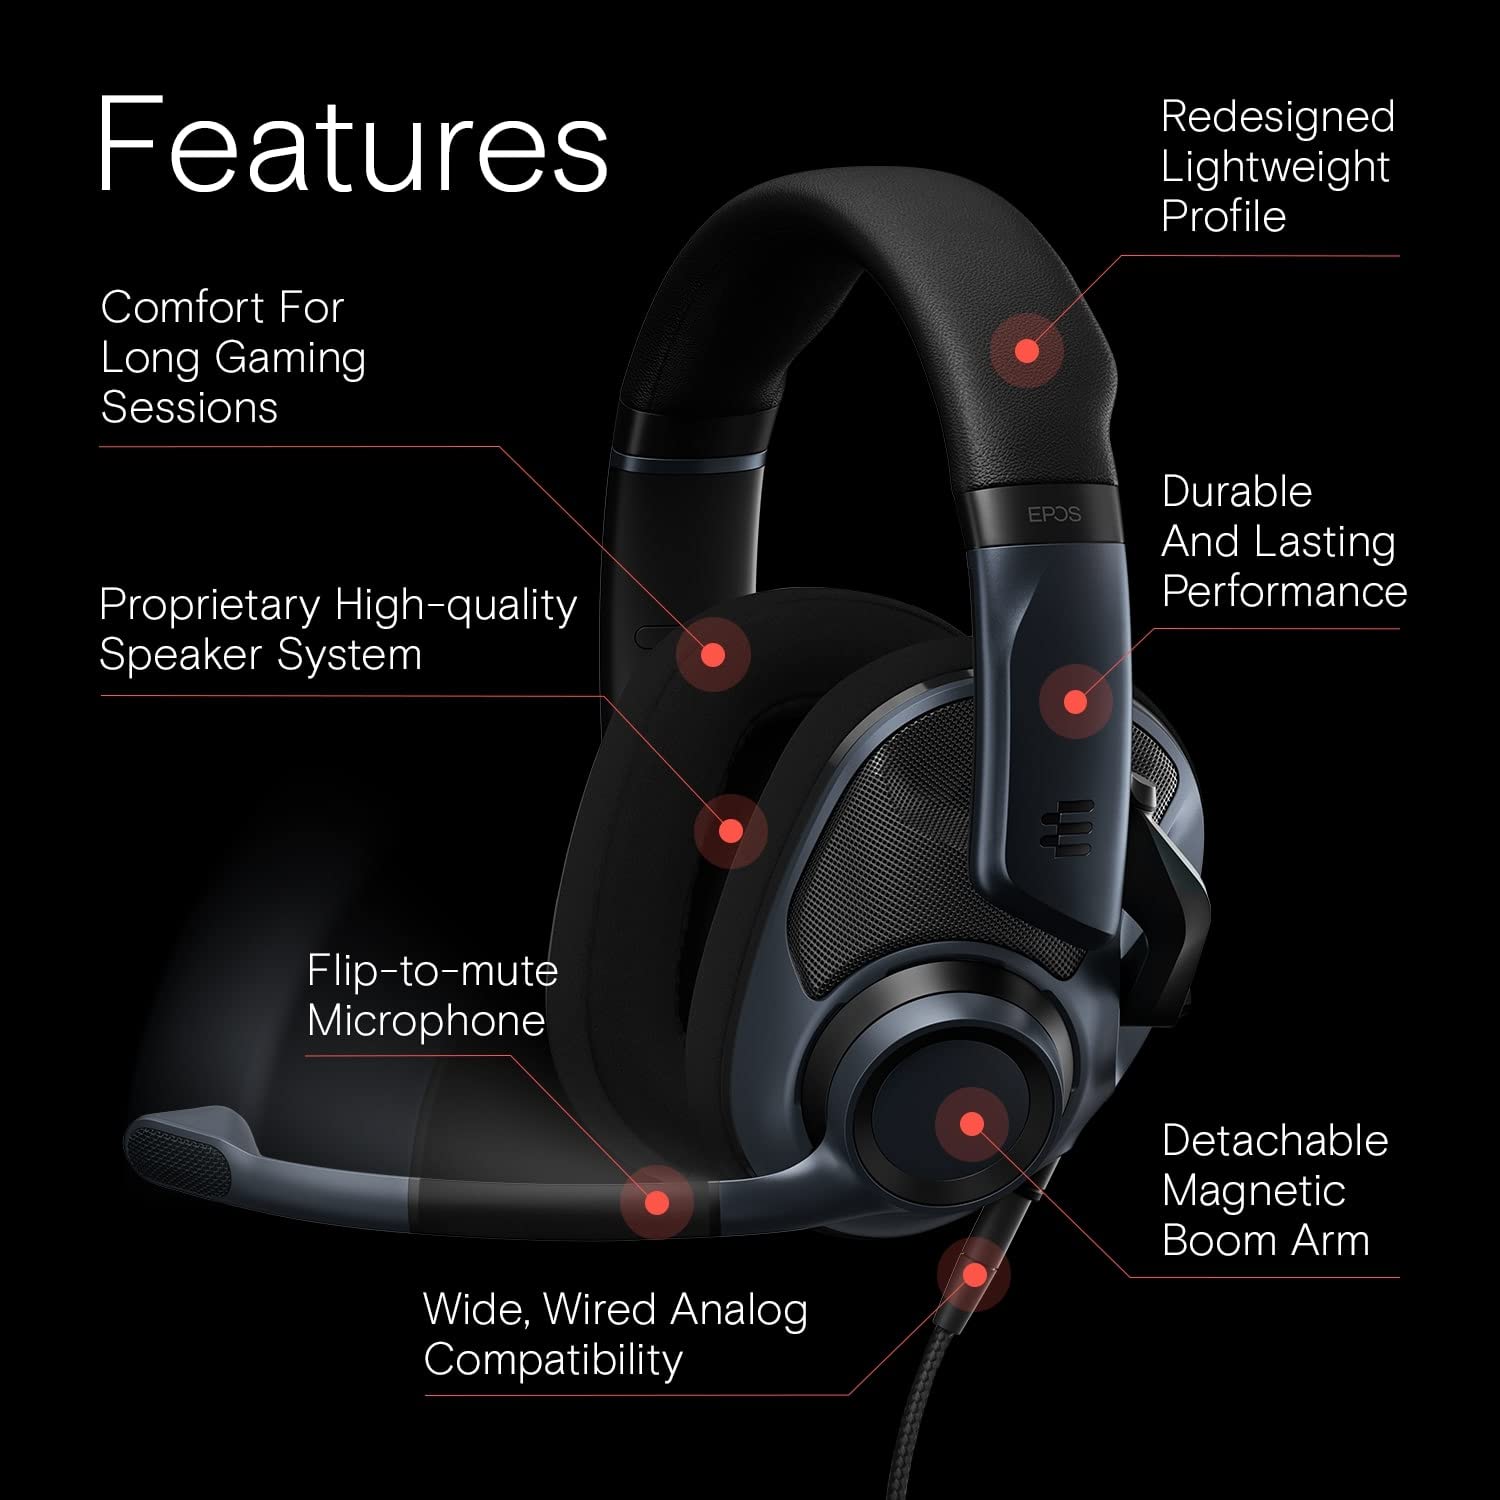 EPOS H6Pro - Open Acoustic Gaming Headset with Mic - Lightweight Headband - Comfortable & Durable Design - Xbox Headset - PS4 Headset - PS5 Headset - PC/Windows Headset - Gaming Accessories (Black)